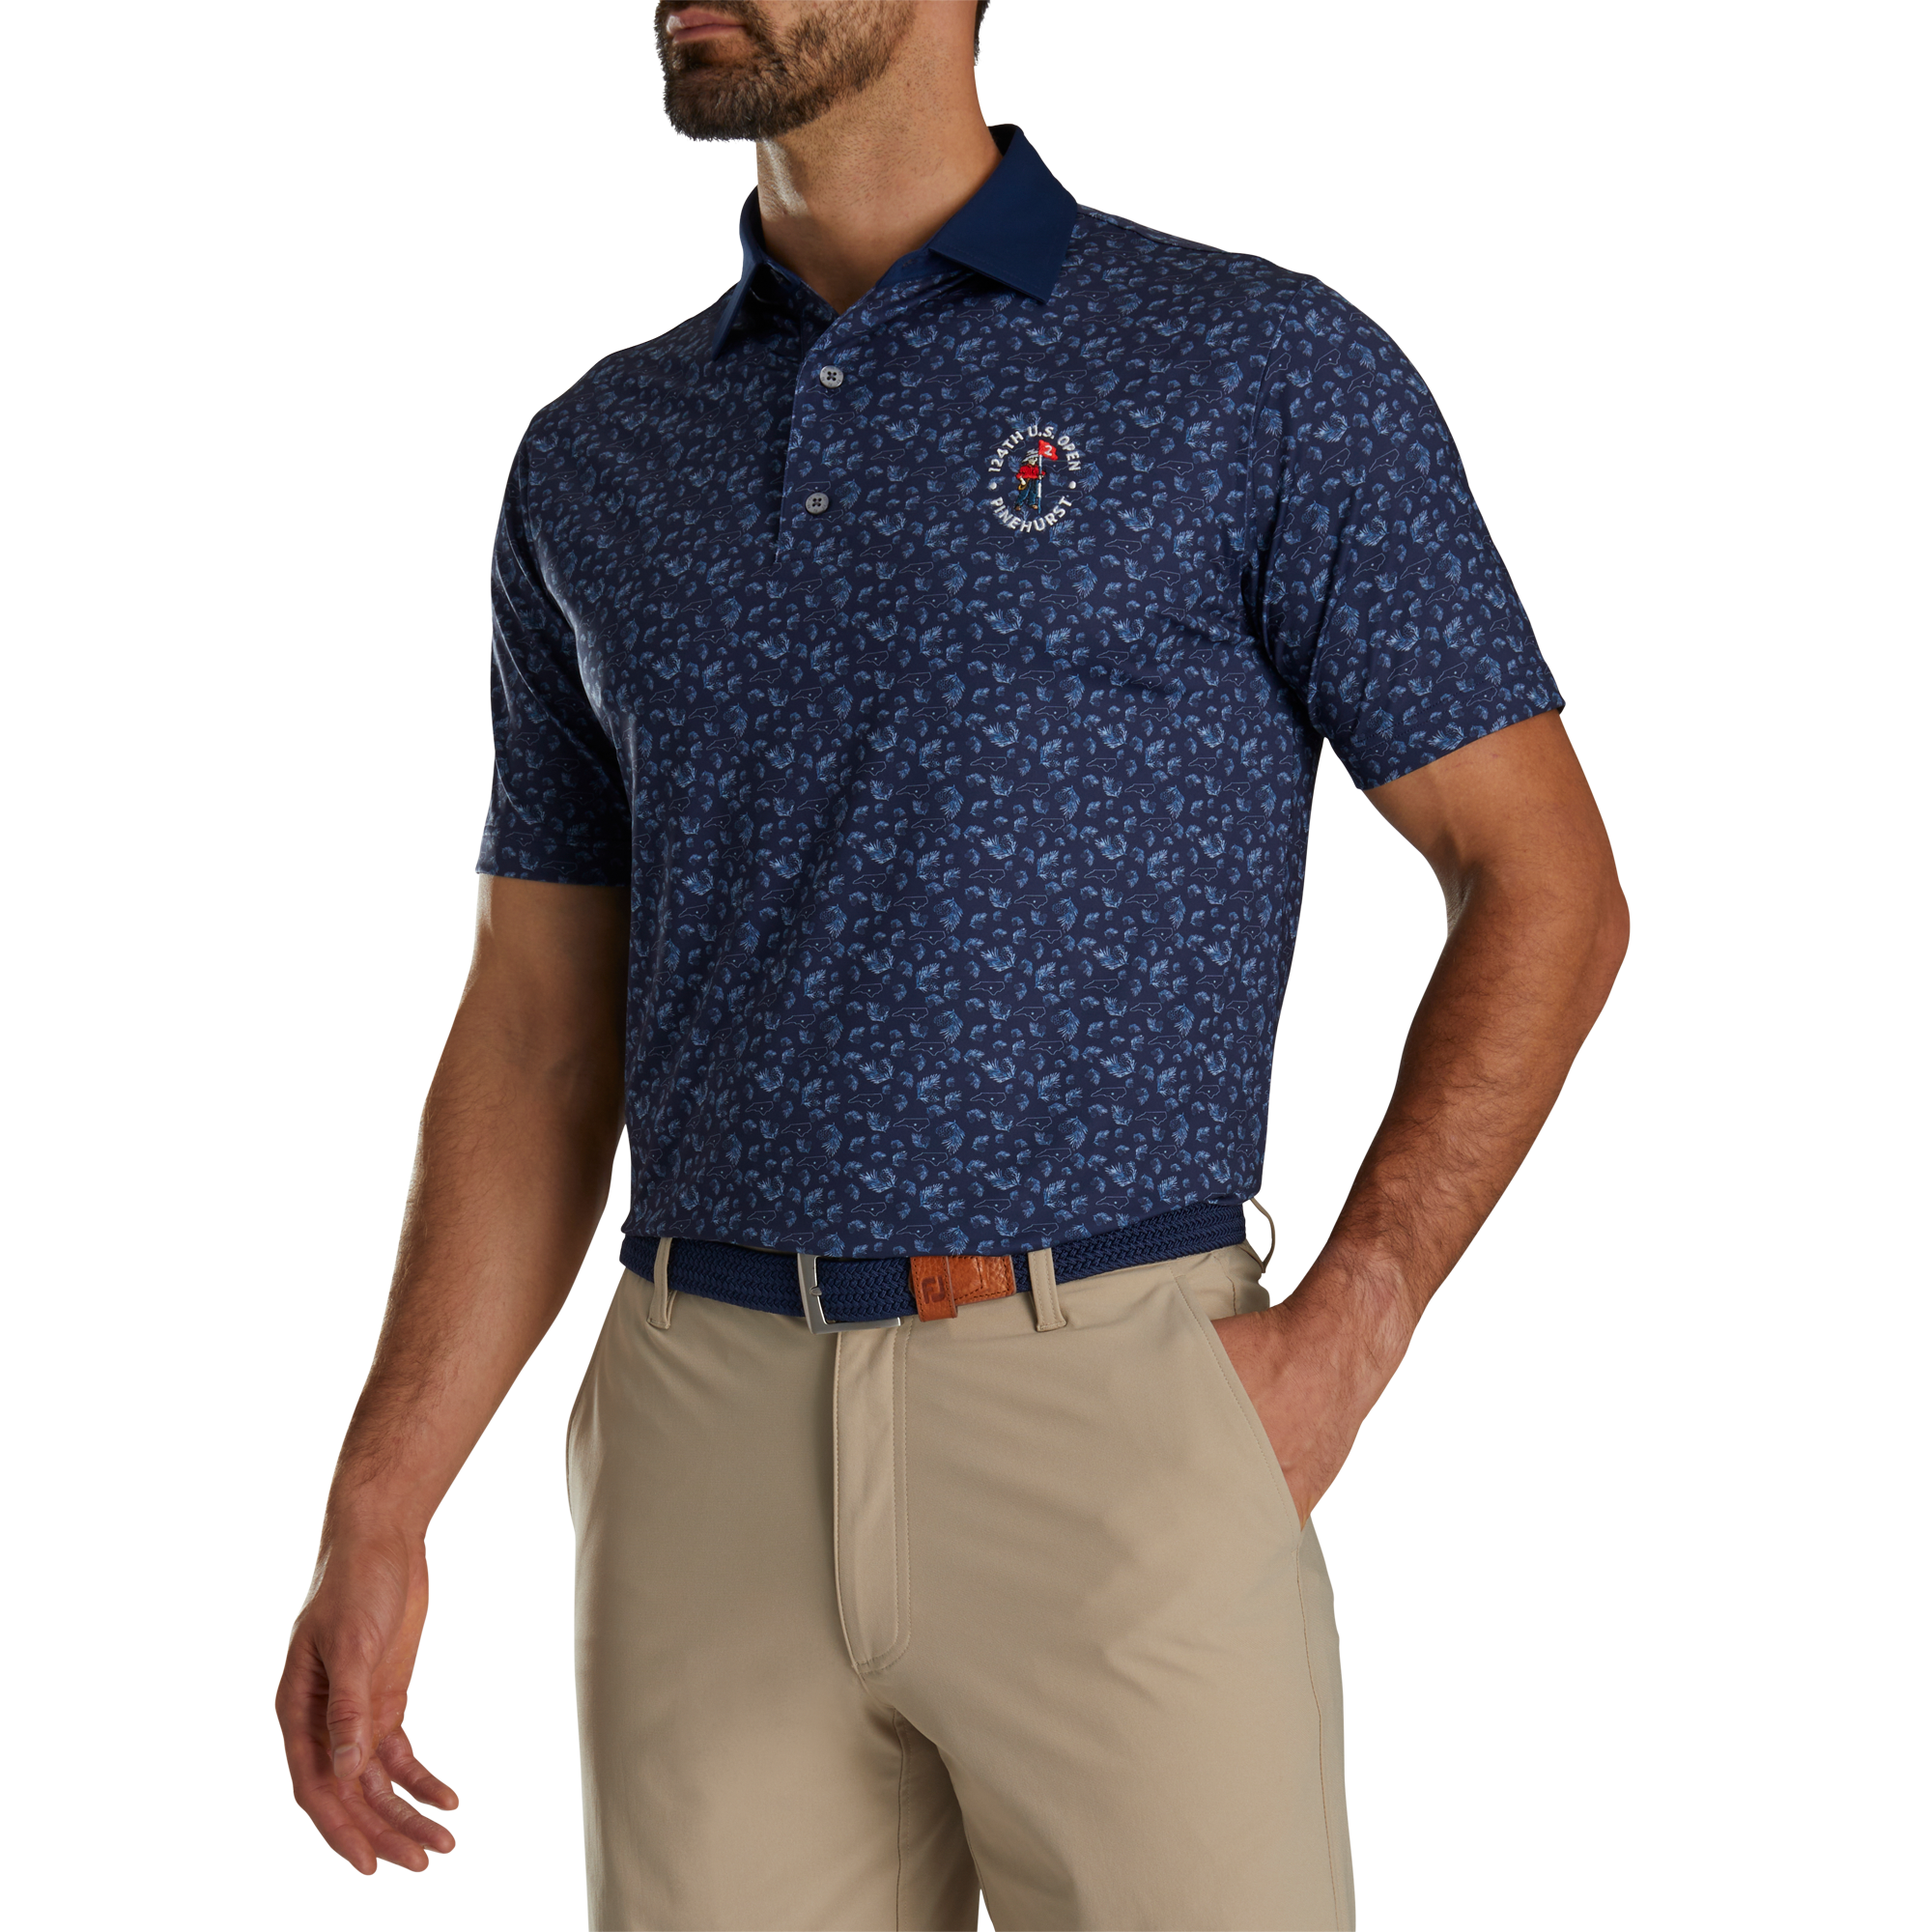 Men's Golf Shirts - Top Brands & Great Prices | PGA TOUR Superstore